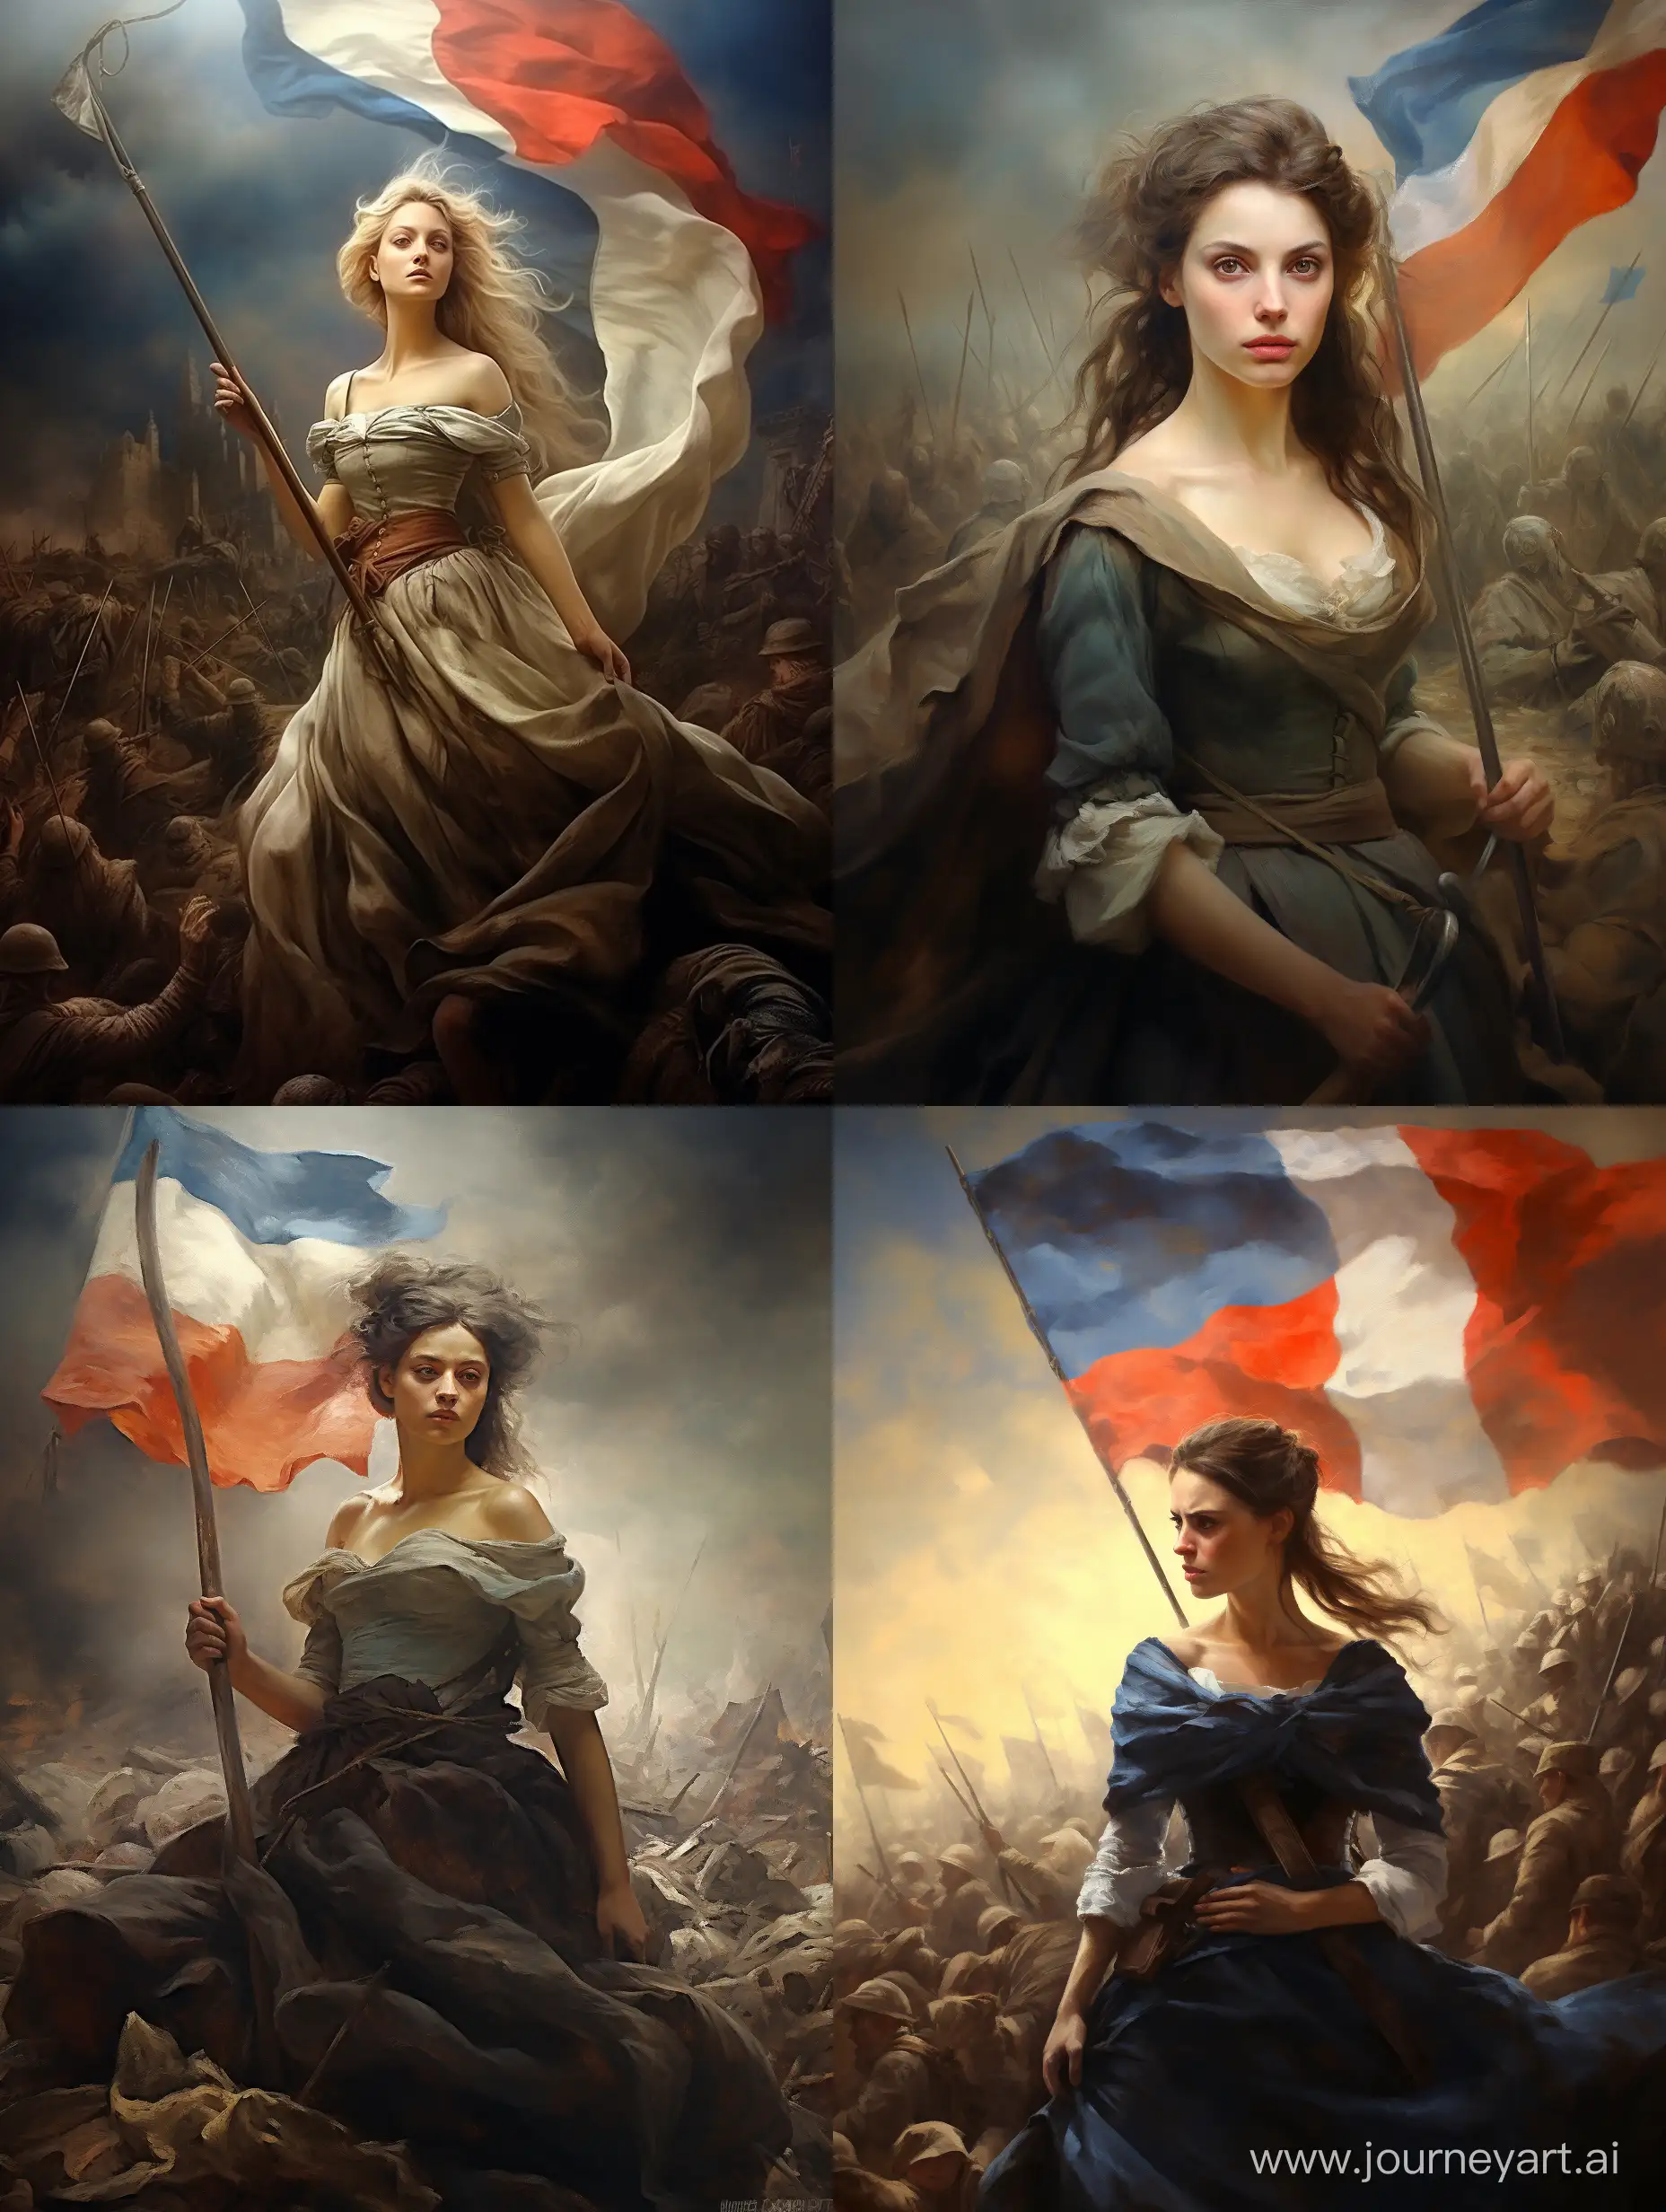 /imagine prompt: French revolution woman is holding a flag in the middle of a battlefield. rococo style, Renaissance, 1700s, blending painting